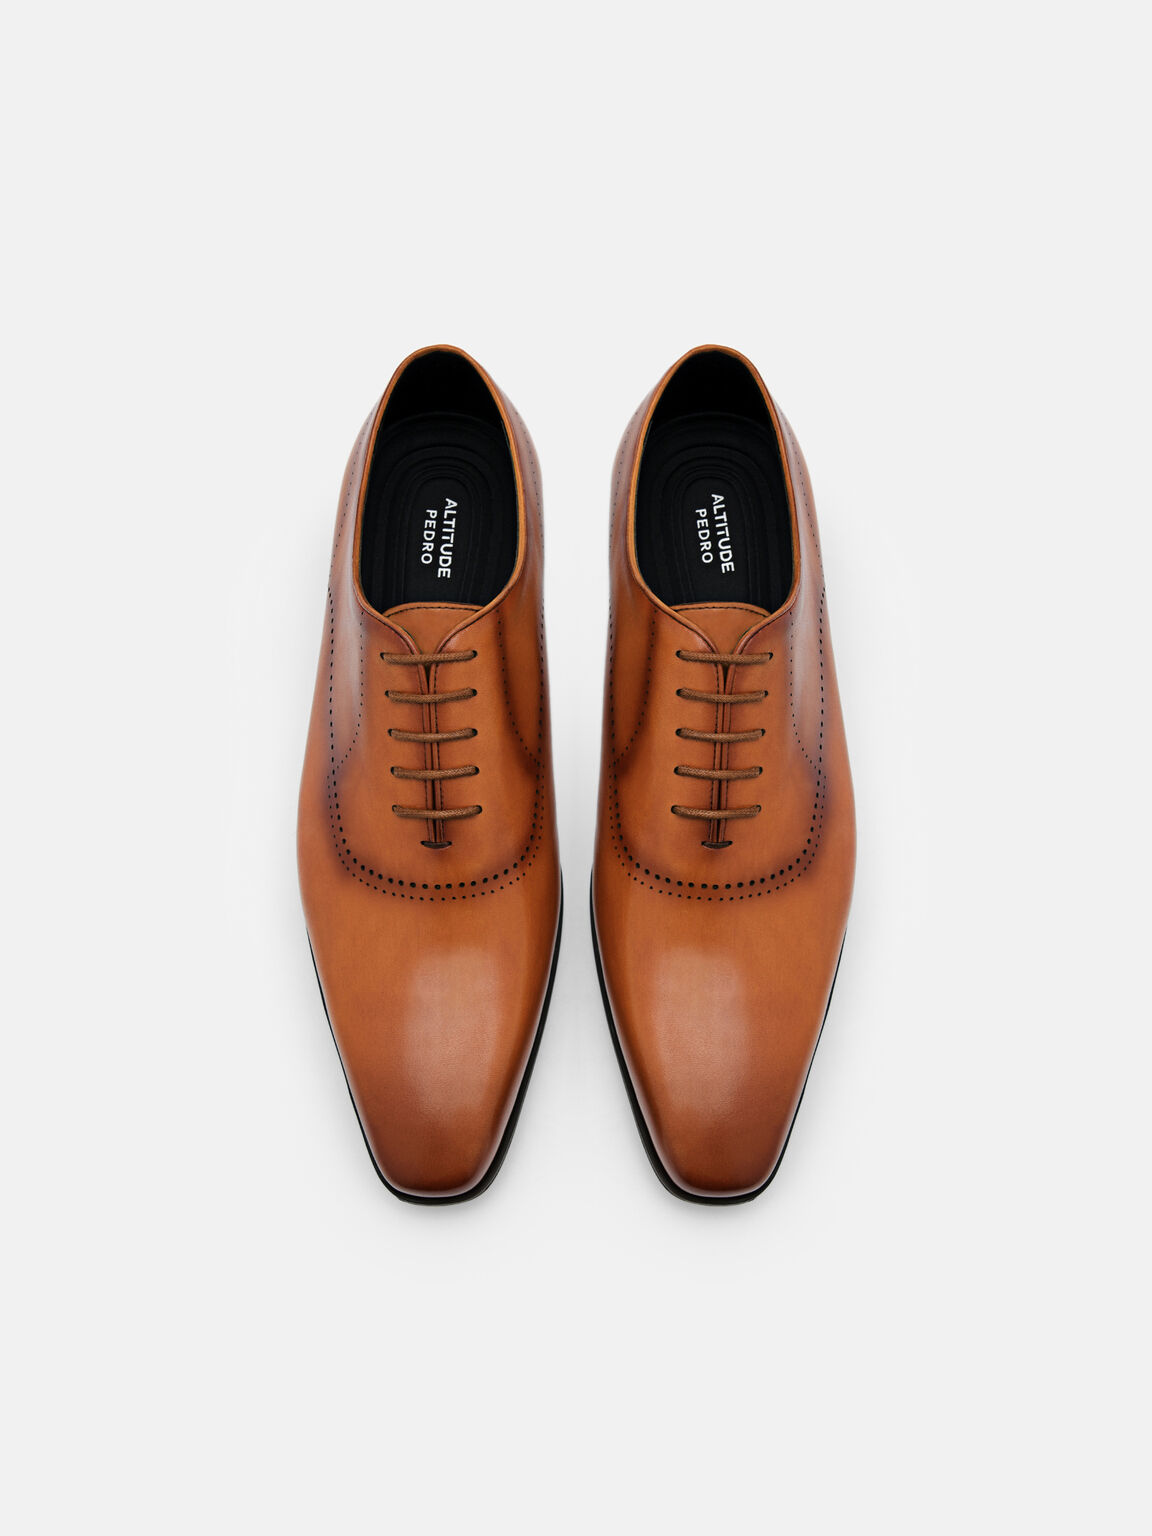 Altitude Lightweight Leather Oxford Shoes, Camel